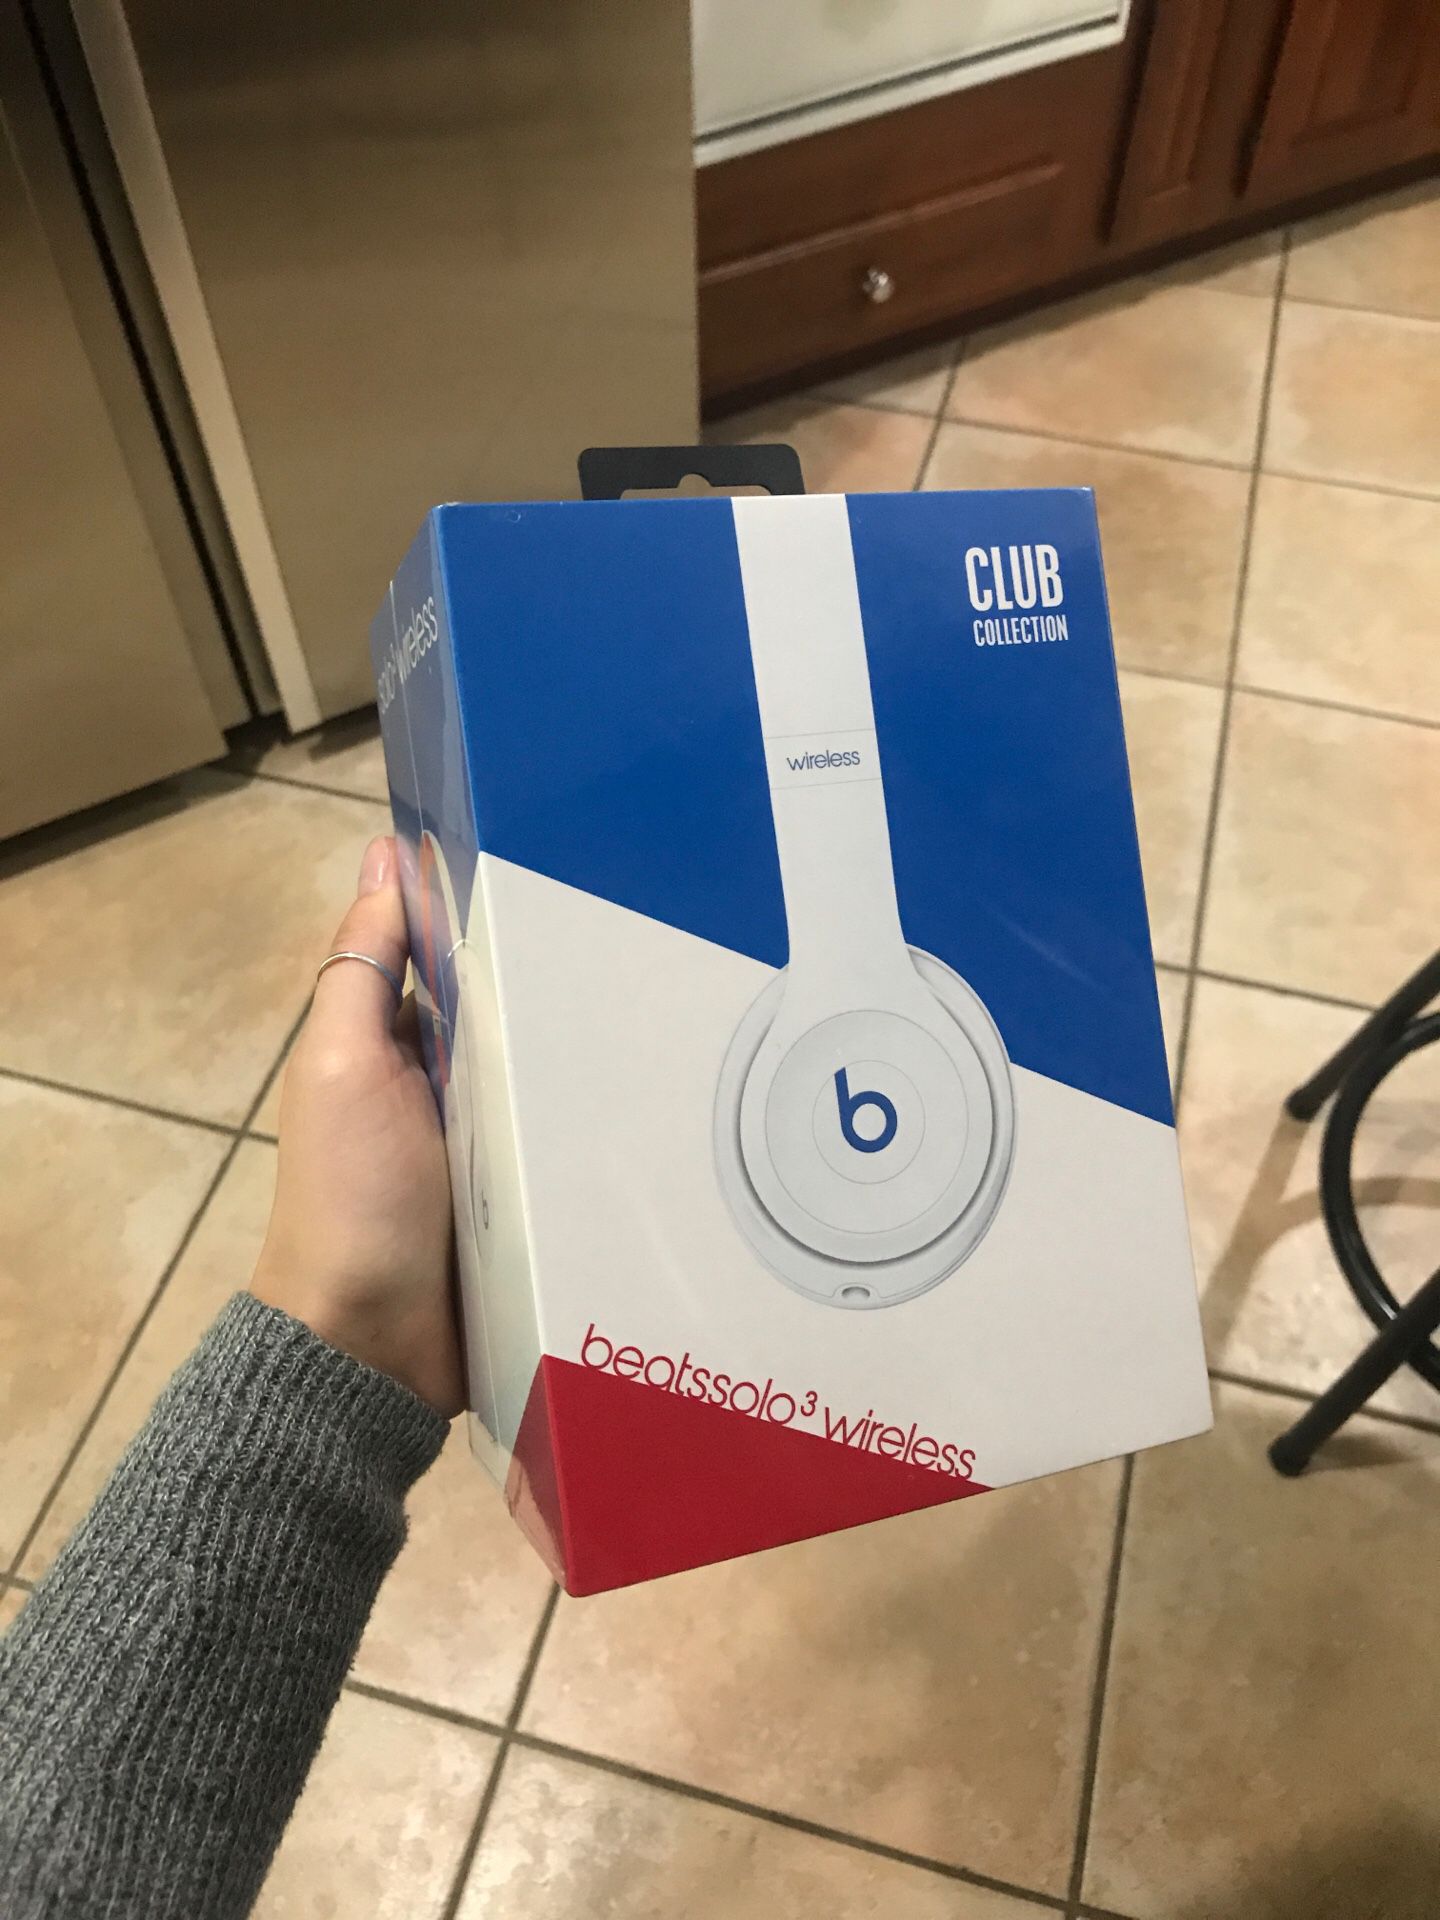 Beat solo 3 wireless club collection